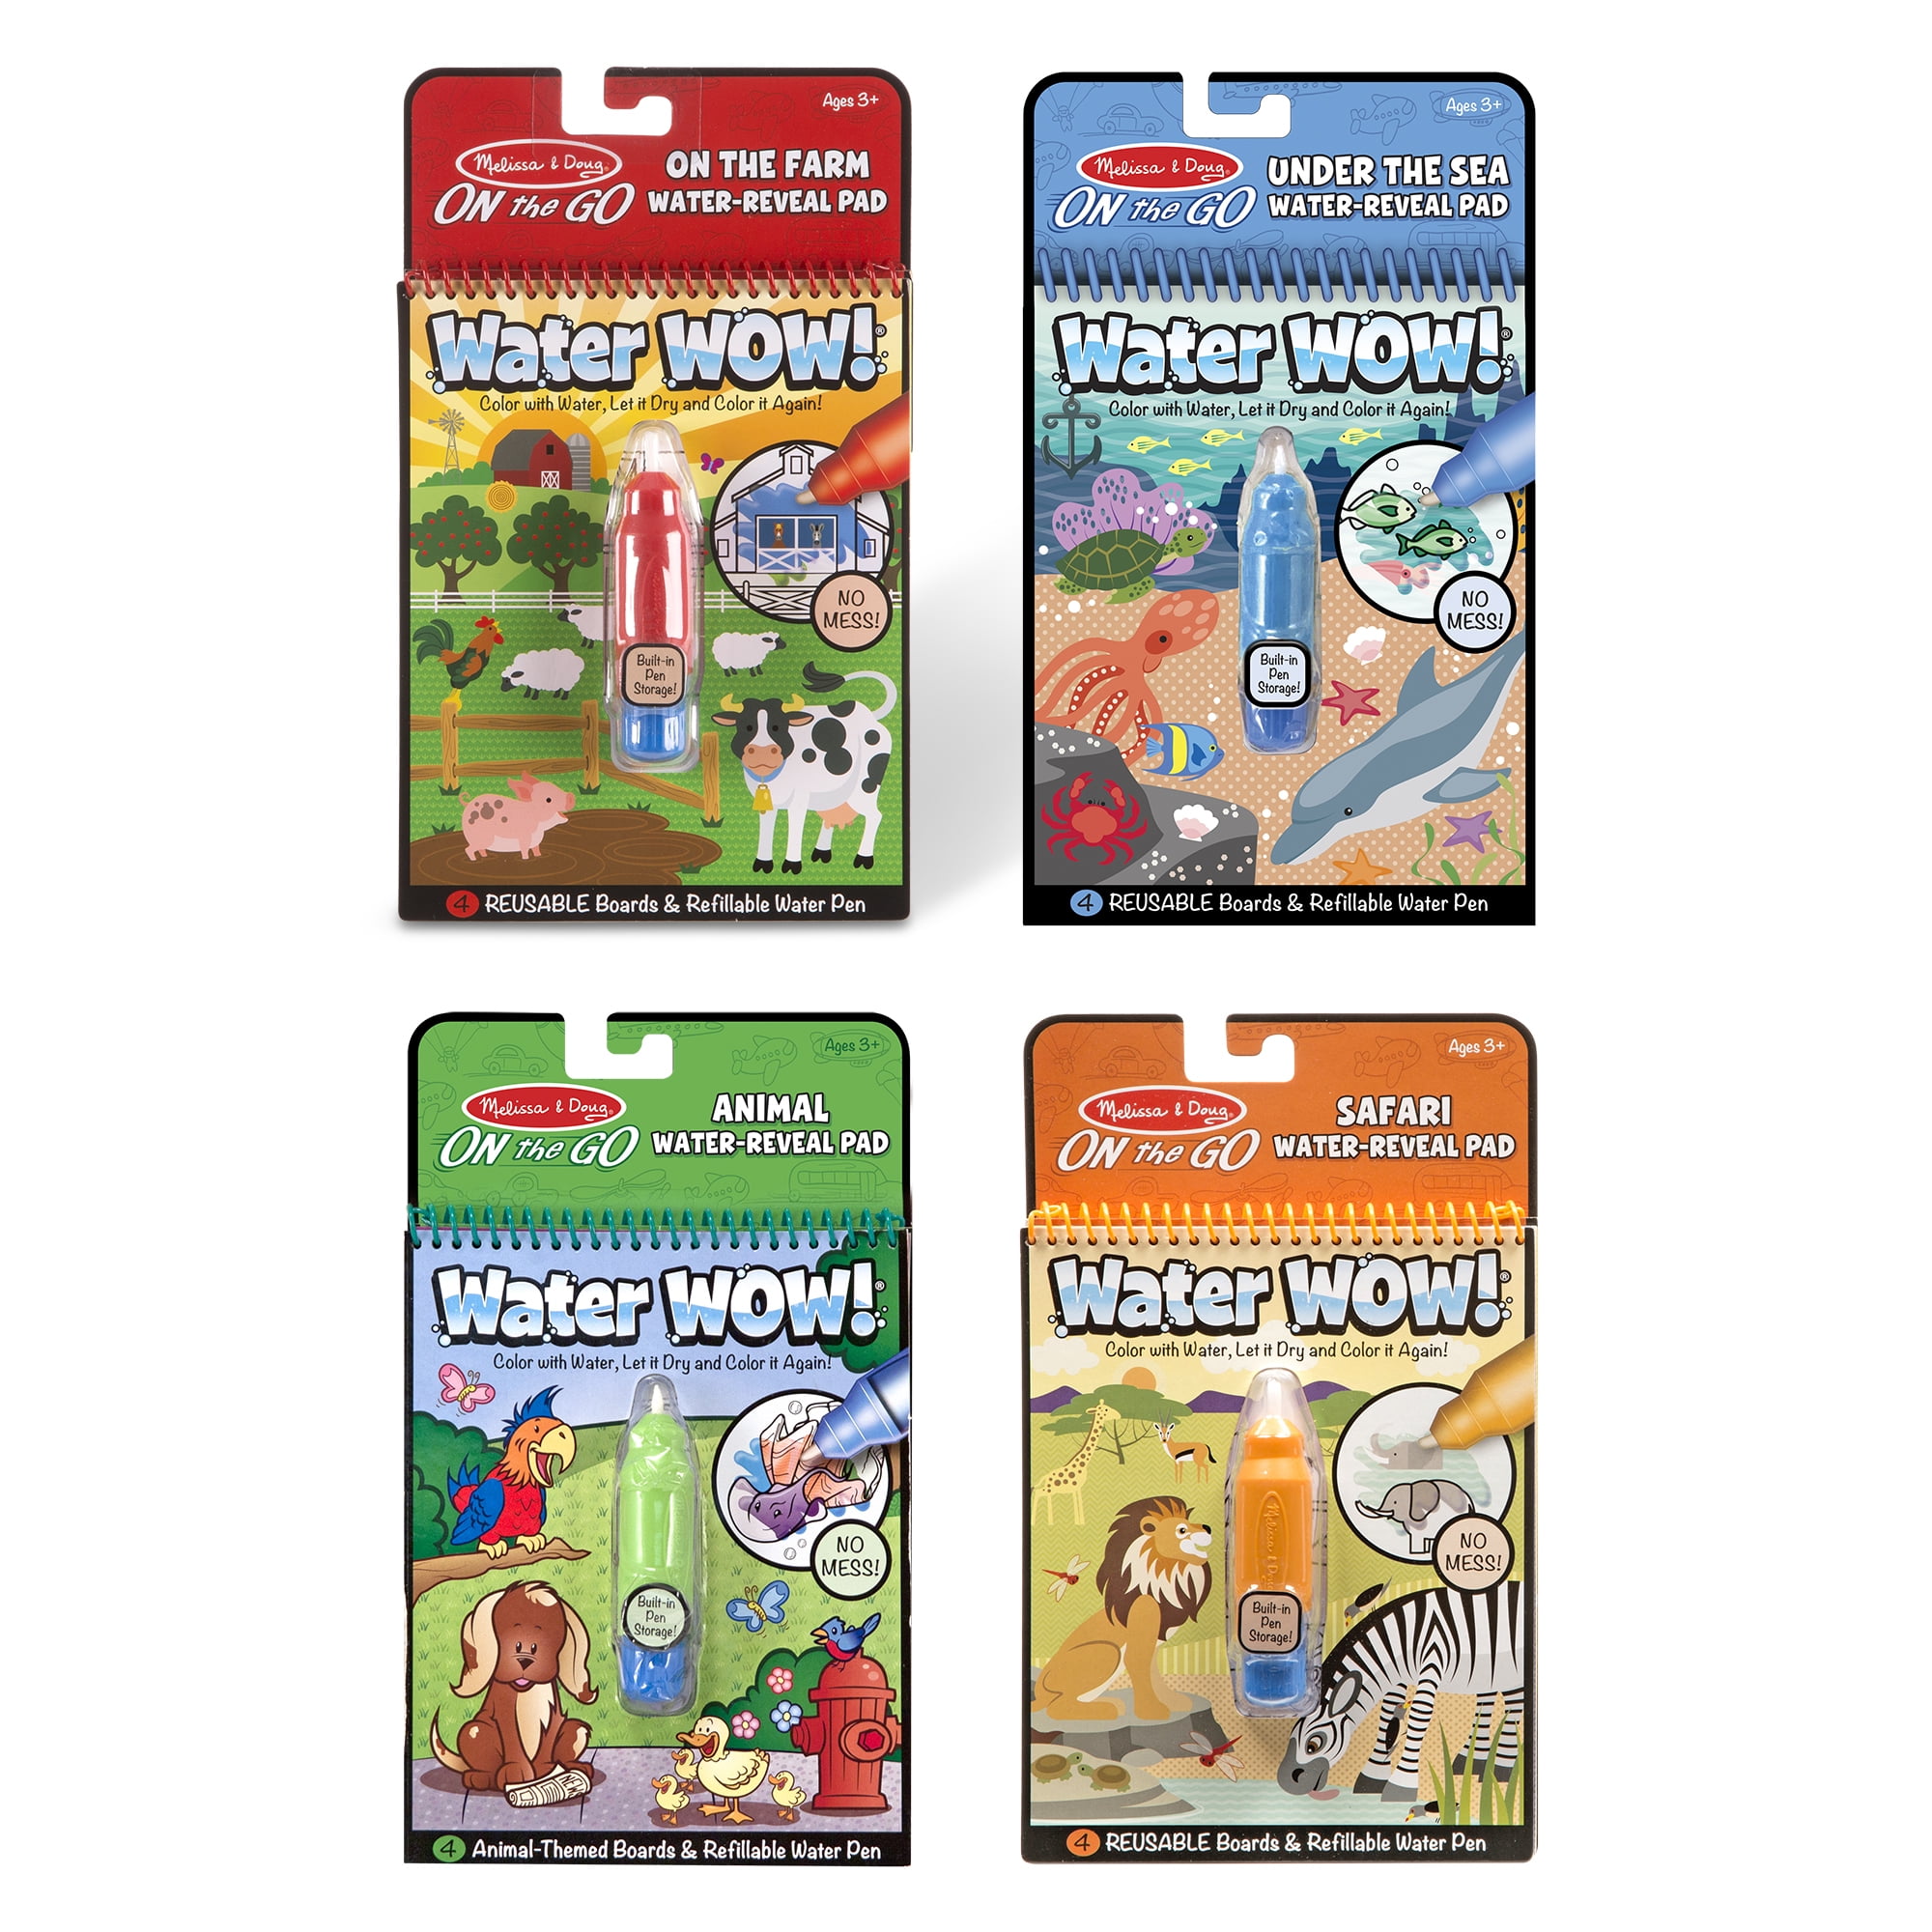 Safari Water Reveal Pad and On The Go Water Wow Connect the Dots Bundle Melissa & Doug Wow